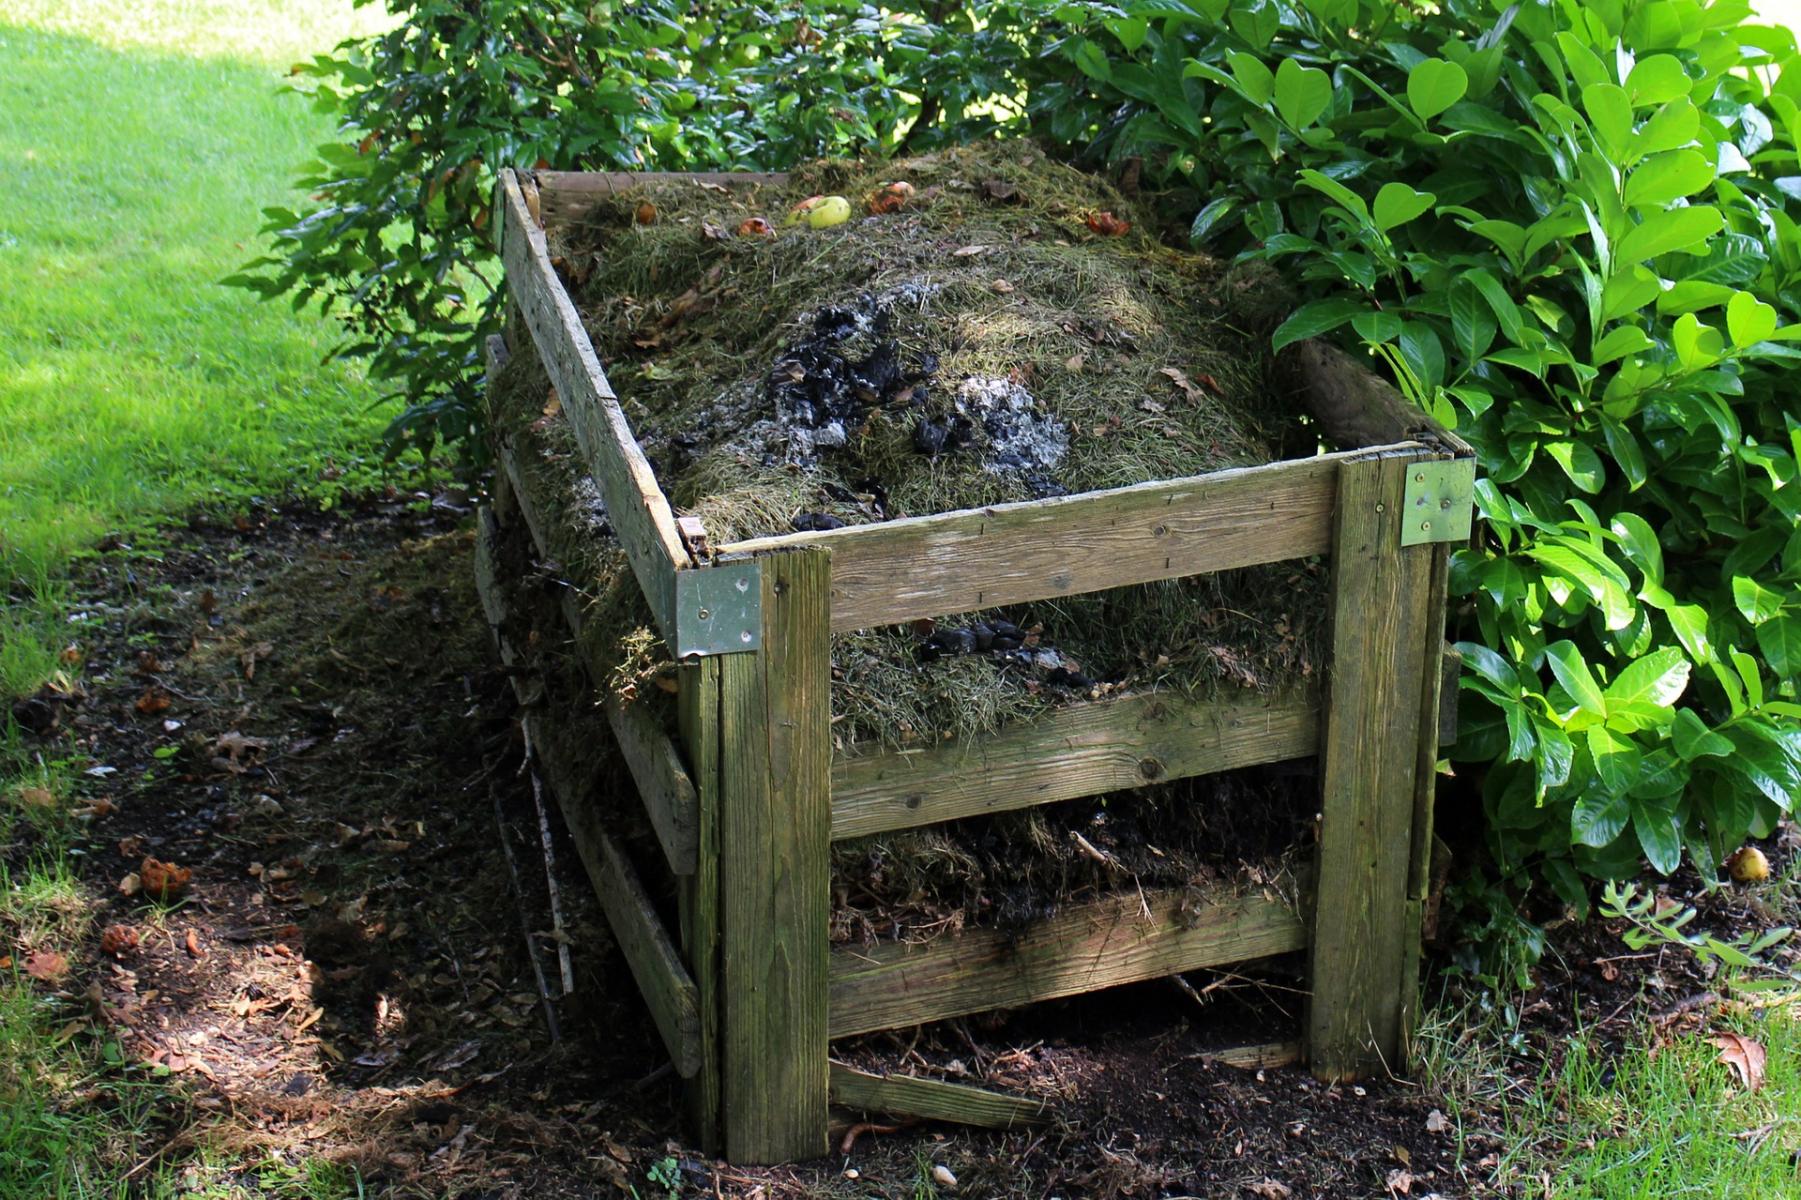 Composting is simple, making use of yard waste like grass clippings and tree leaves. Finished compost is a great soil amendment for gardens and landscape beds.